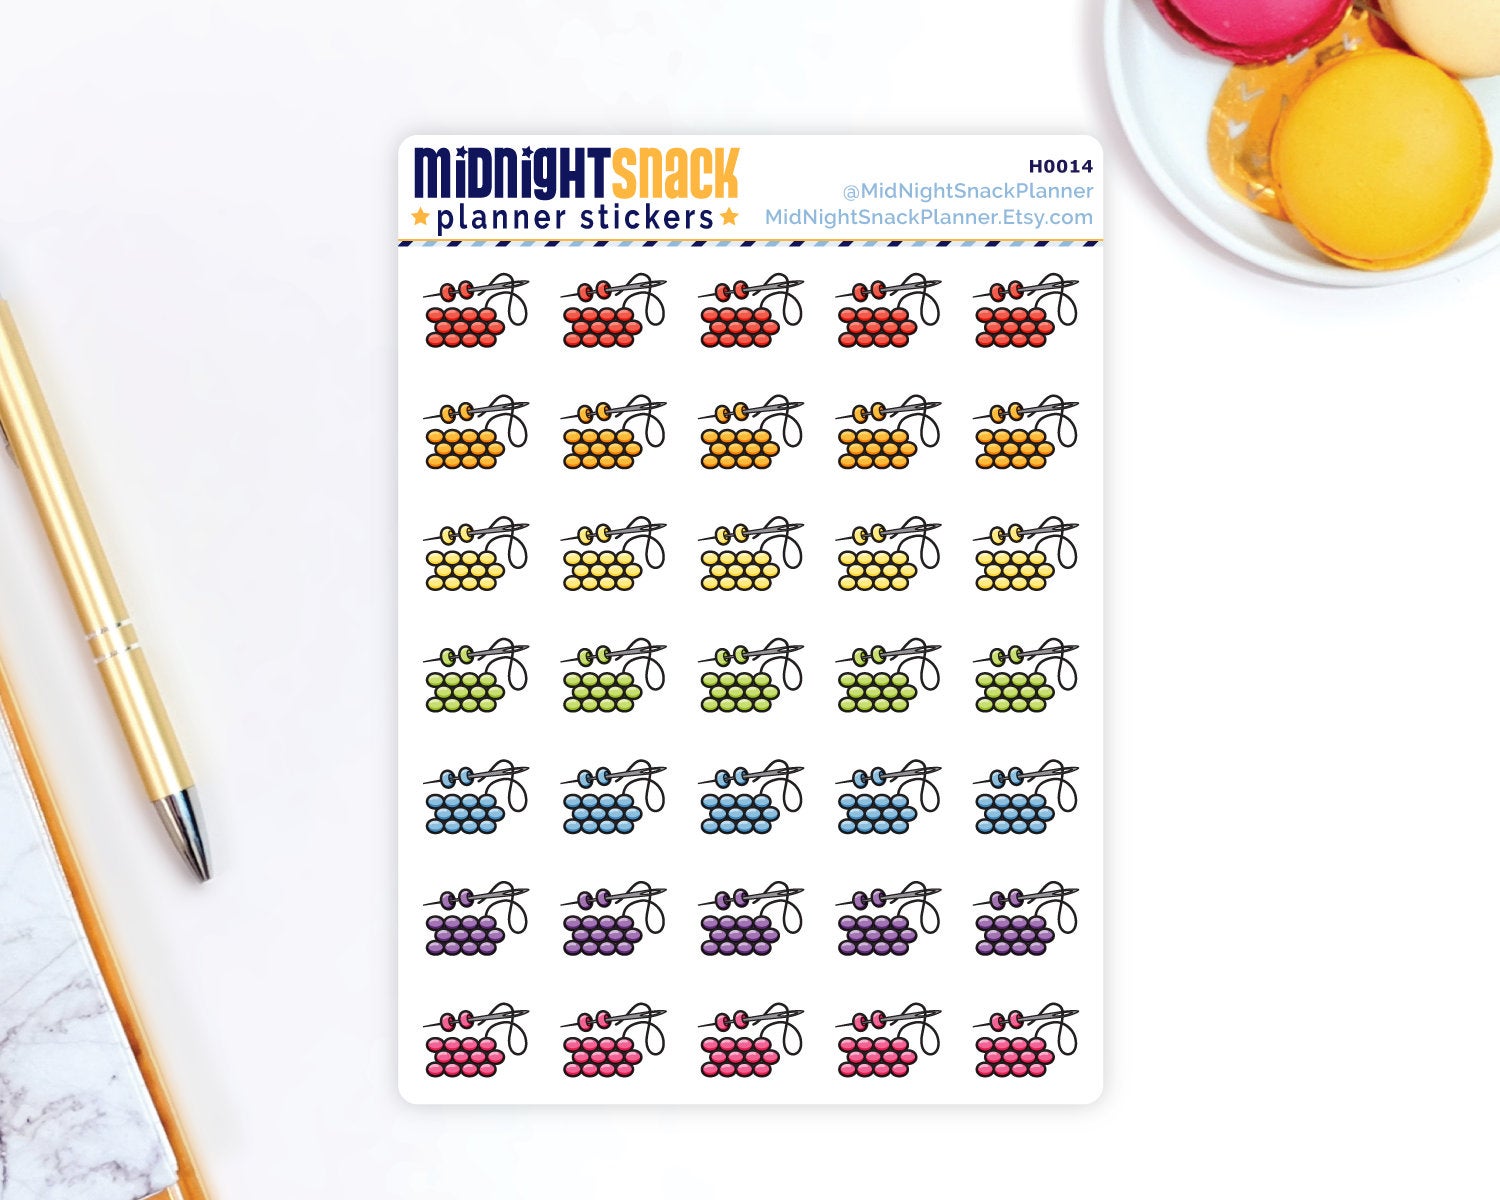 Jewelry and Bead Work: Craft Planner Stickers Midnight Snack Planner